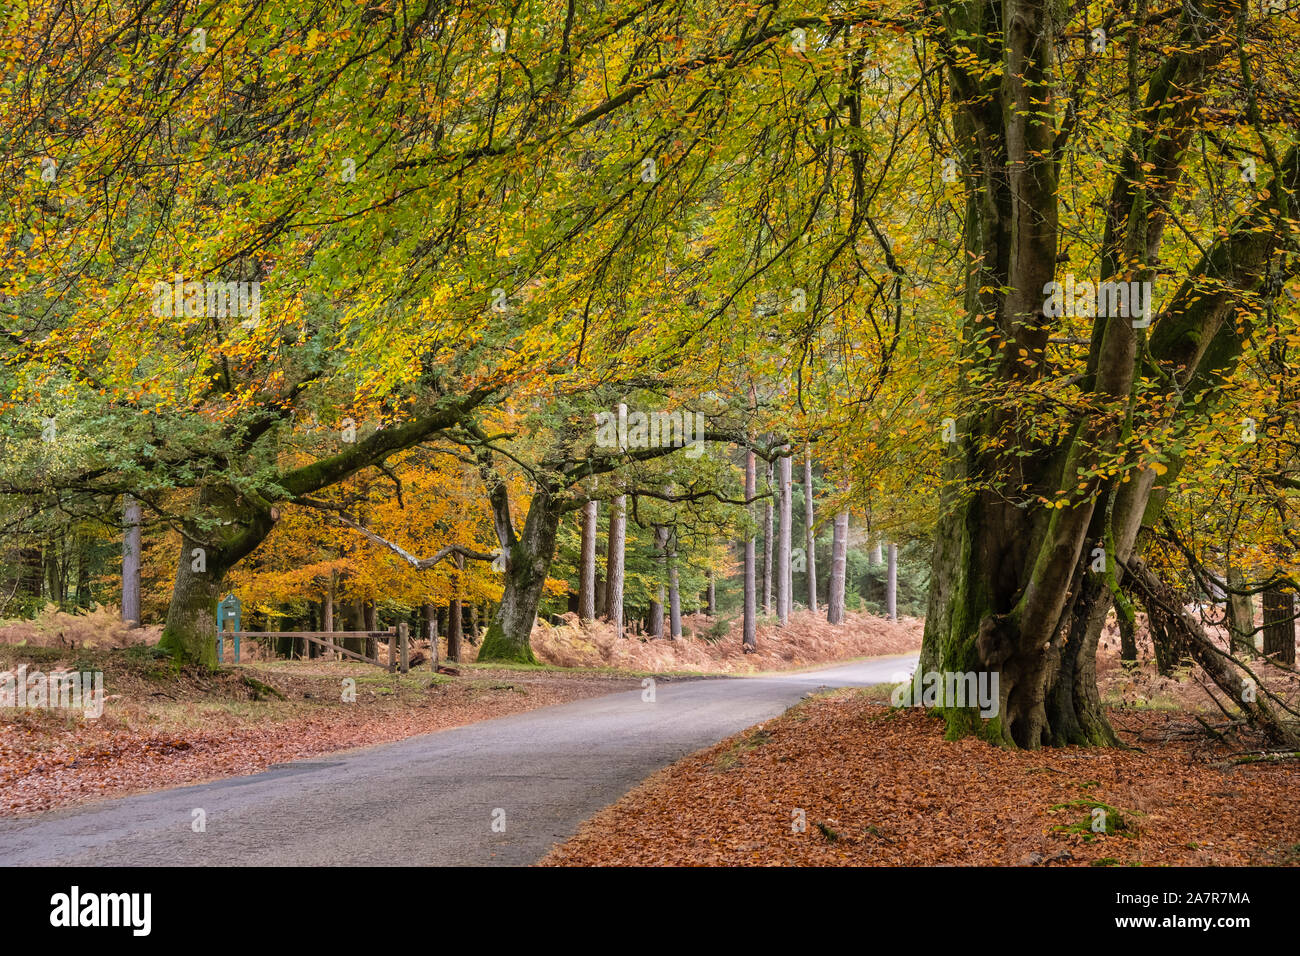 New Forest, Autumn Colour, Beech Trees, Ornamental Drive Road, Hampshire, England, UK. Stock Photo